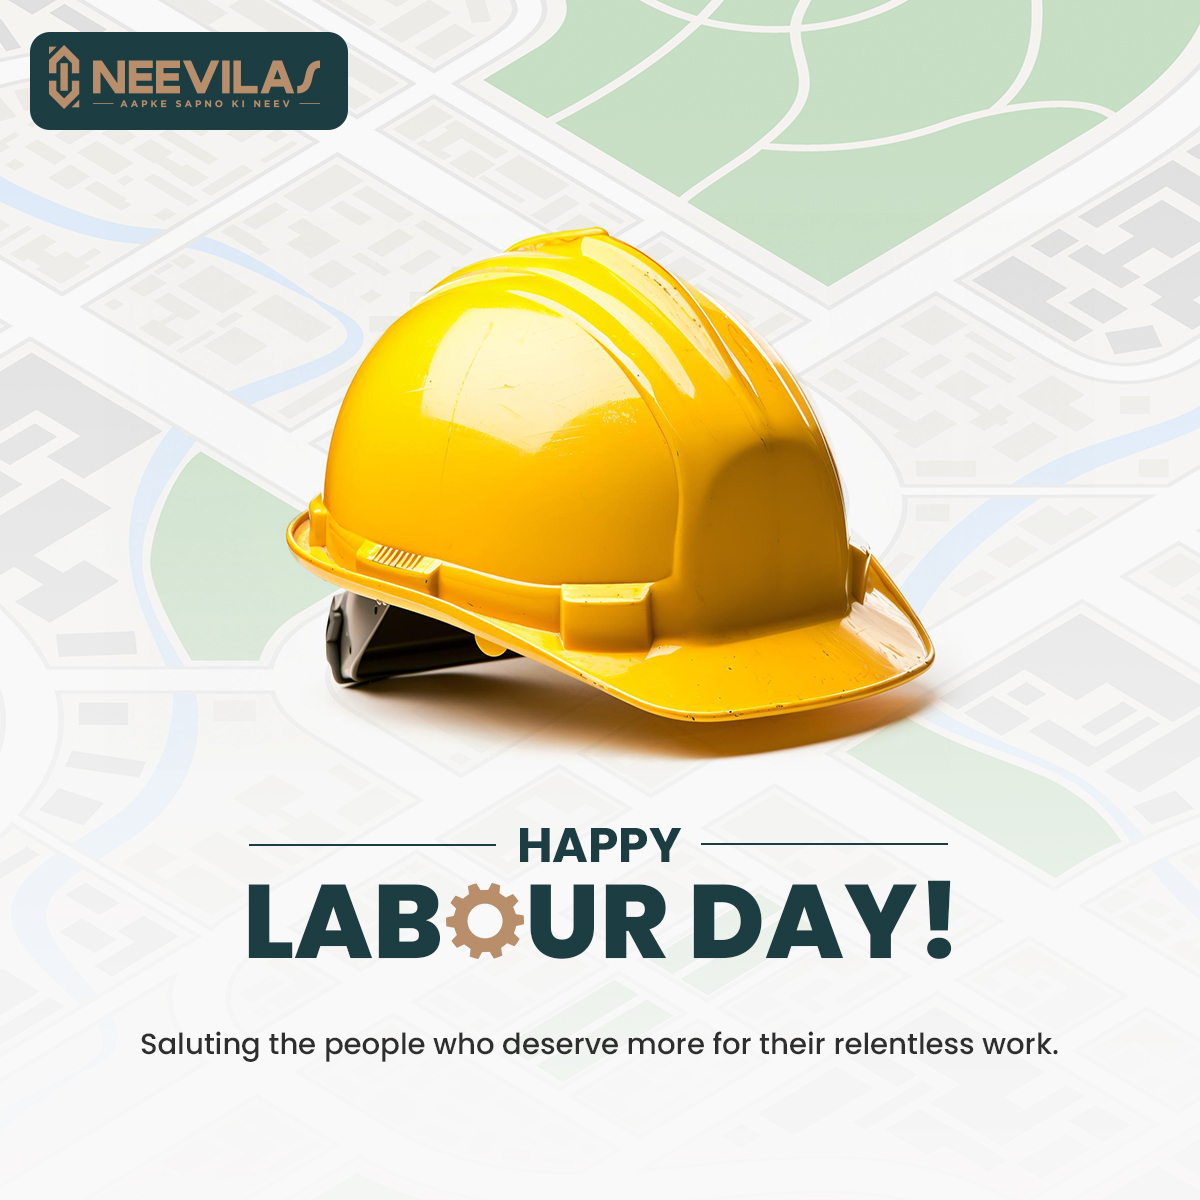 We extend our heartfelt appreciation to all the diligent workers who contribute to making our world a better place. Happy Labour Day!

#NeevilasHomes #LabourDay #LabourDay2023 #WorkersDay #Gratitude #Home #DelhiHomes #HonoringWorkers #Acknowledgment #DedicationRewarded